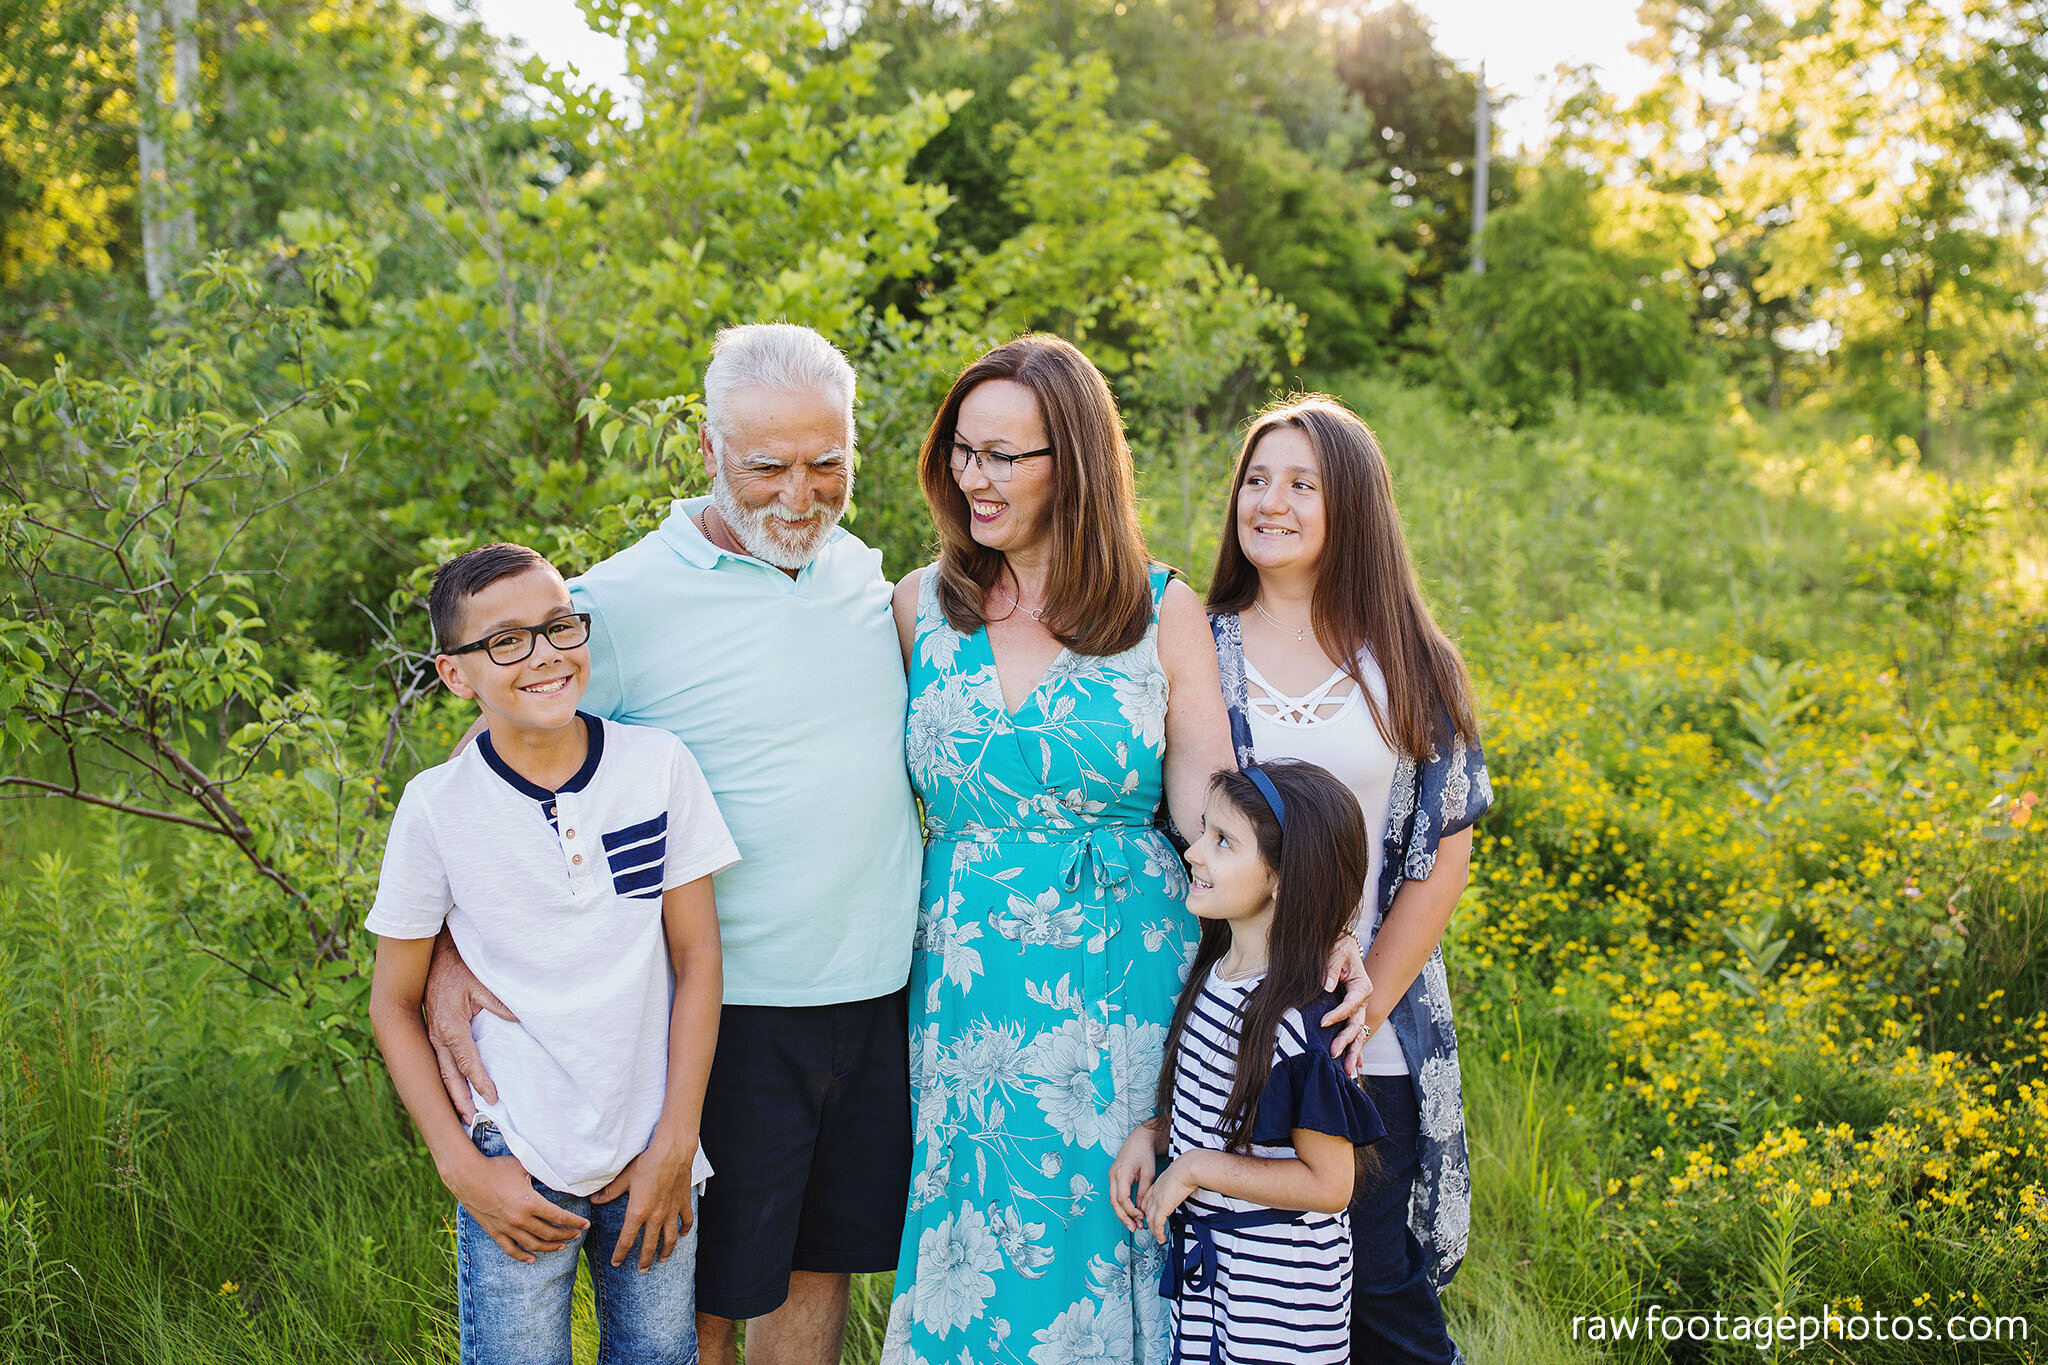 london_ontario_family_photographer-extended_family_session-grandparents-cousins-backyard_session-civic_gardens-raw_footage_photography-002.jpg